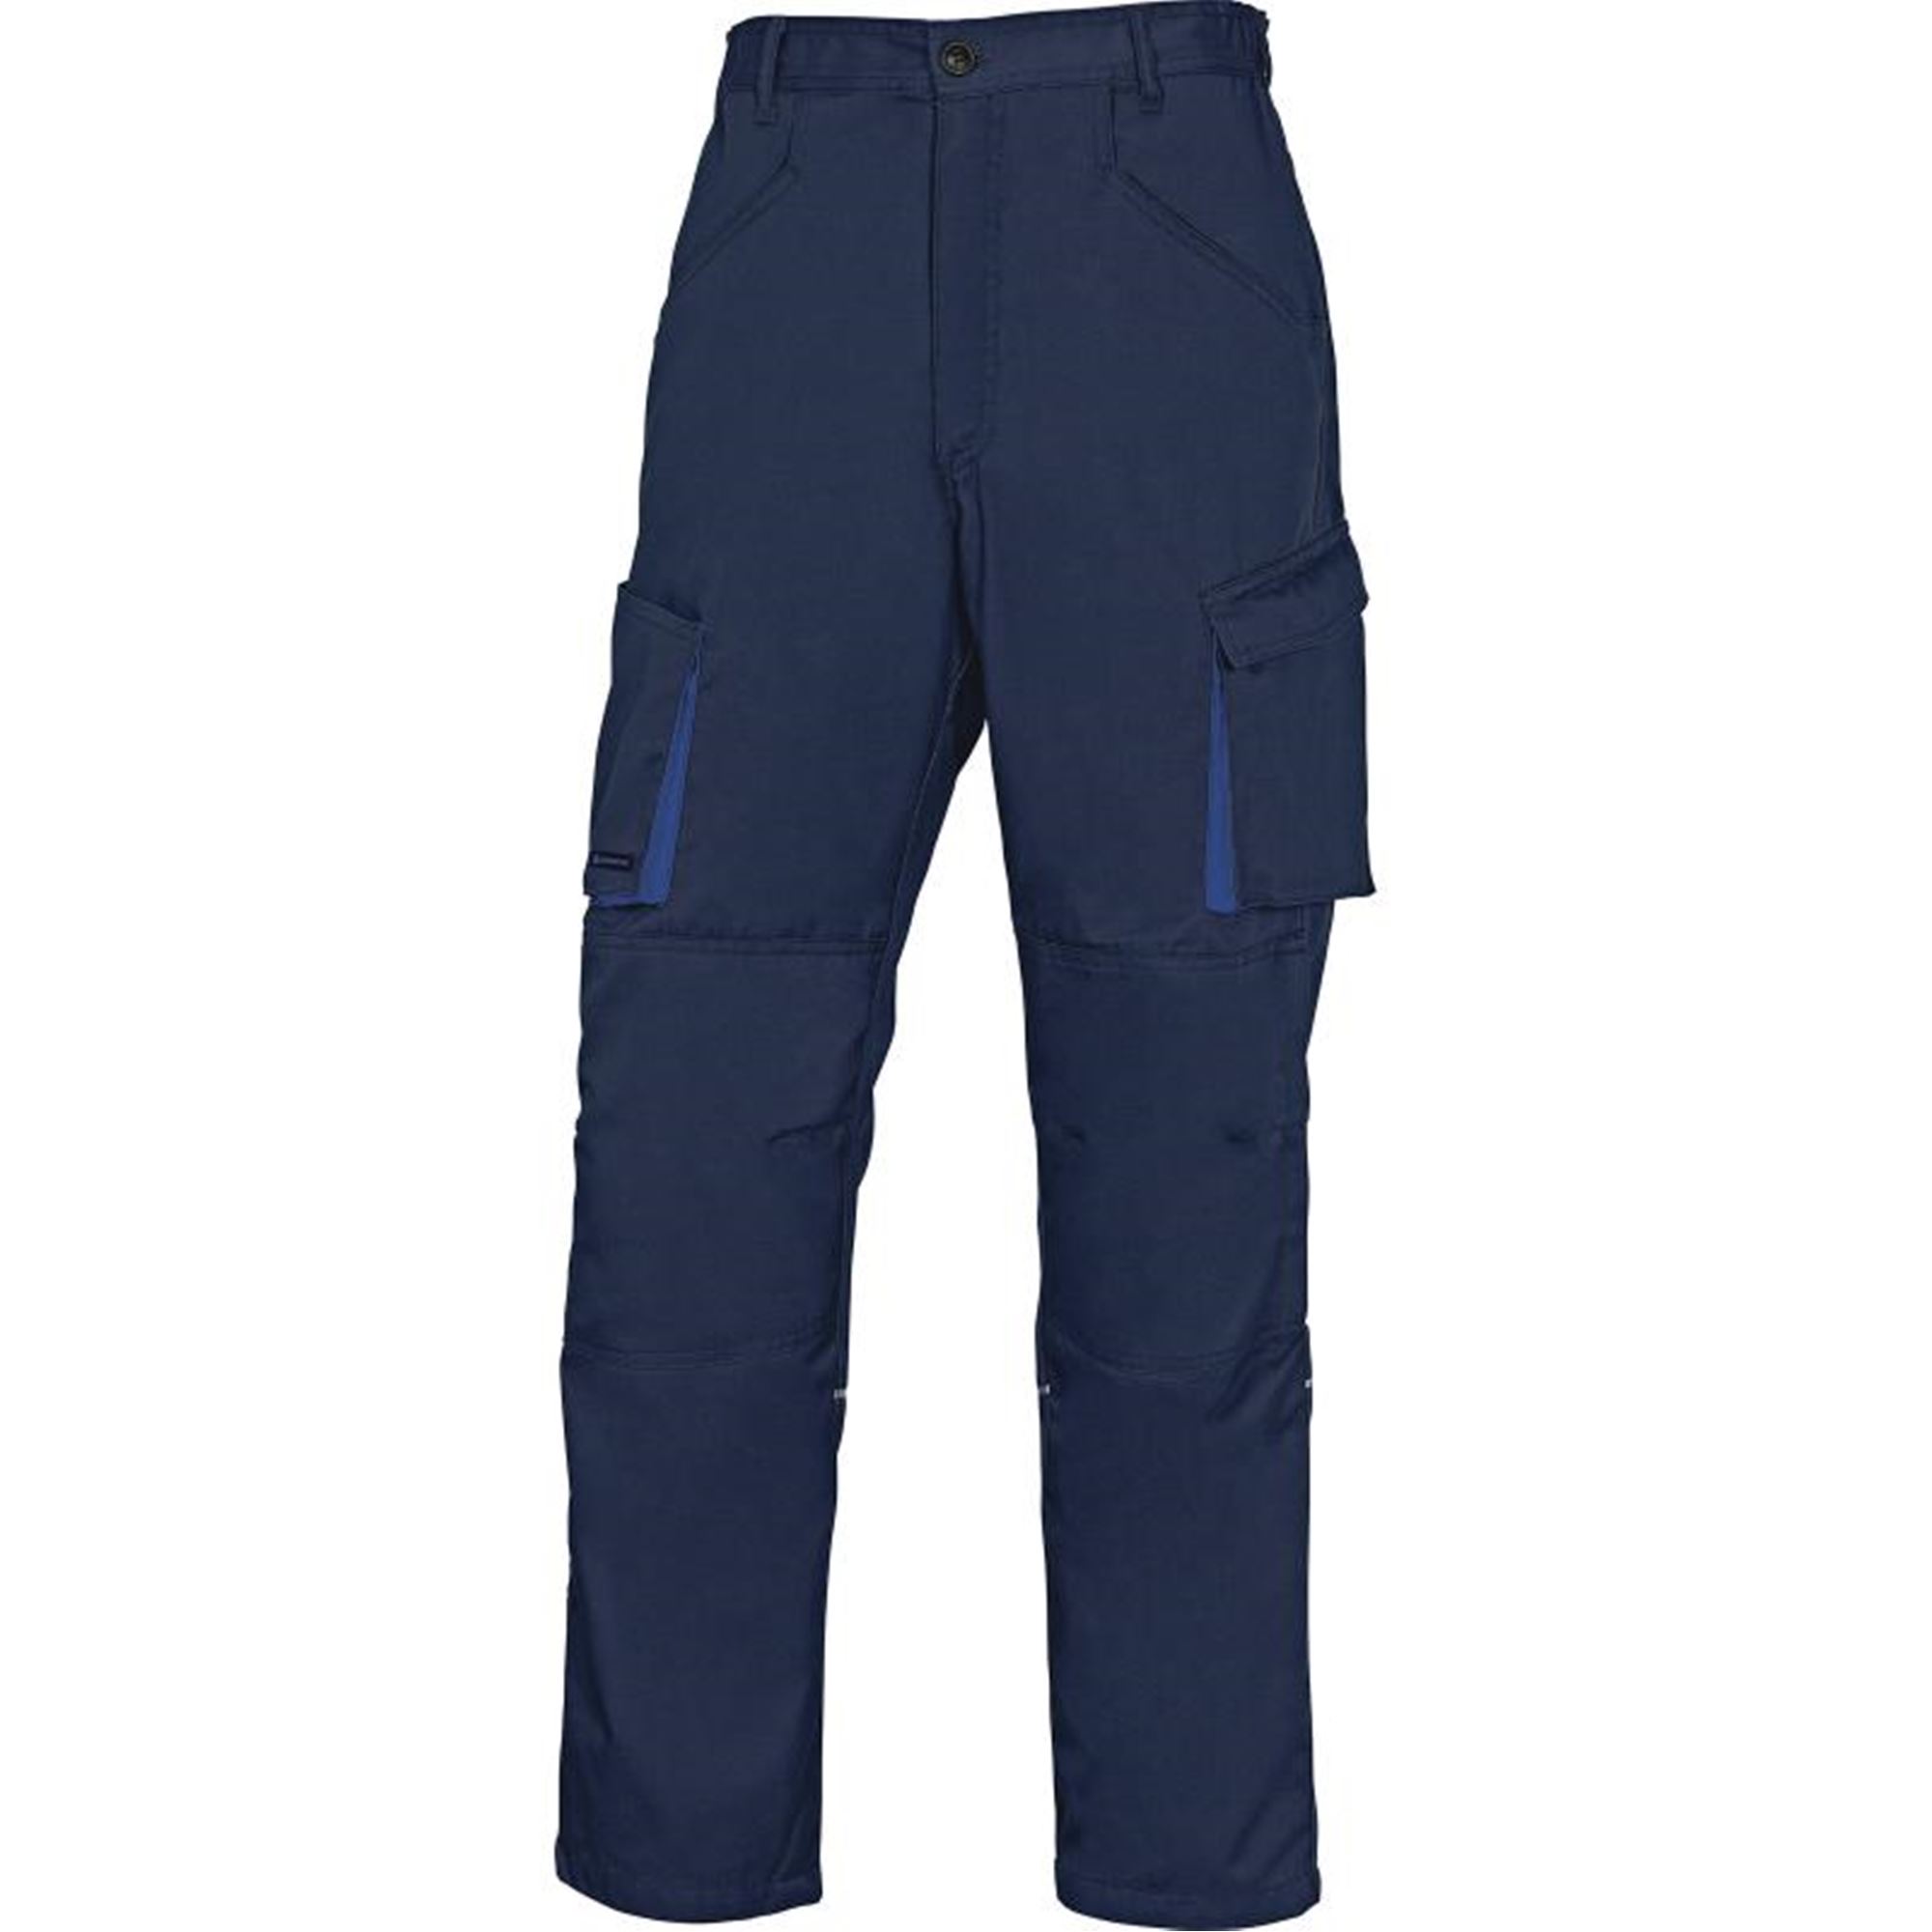 Panoply Mach 2 M2PAN Work Trousers